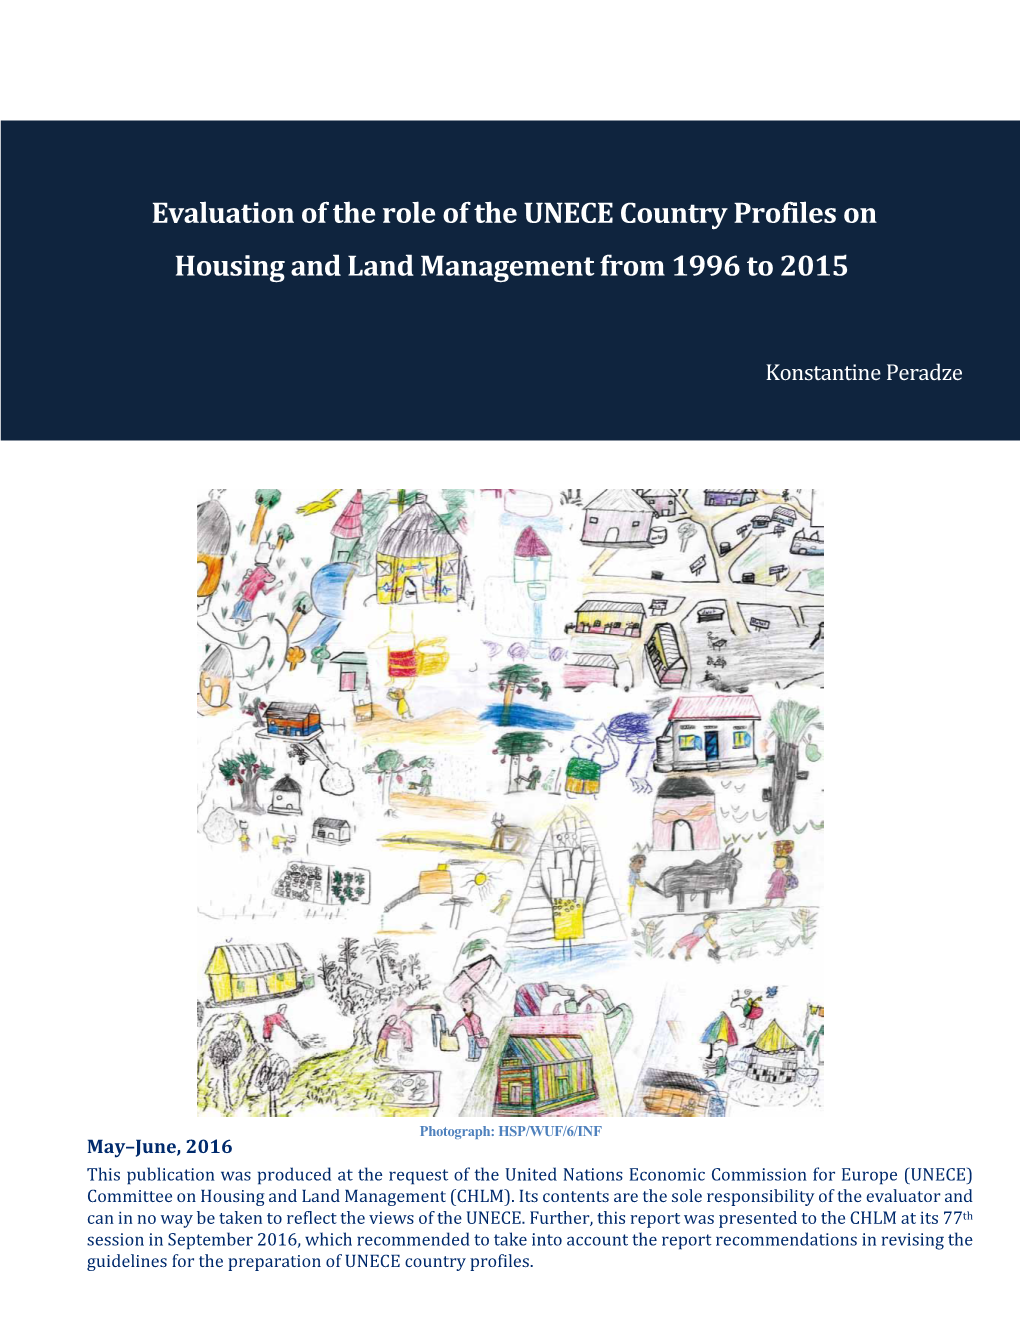 Evaluation of the Role of the UNECE Country Profiles on Housing and Land Management from 1996 to 2015